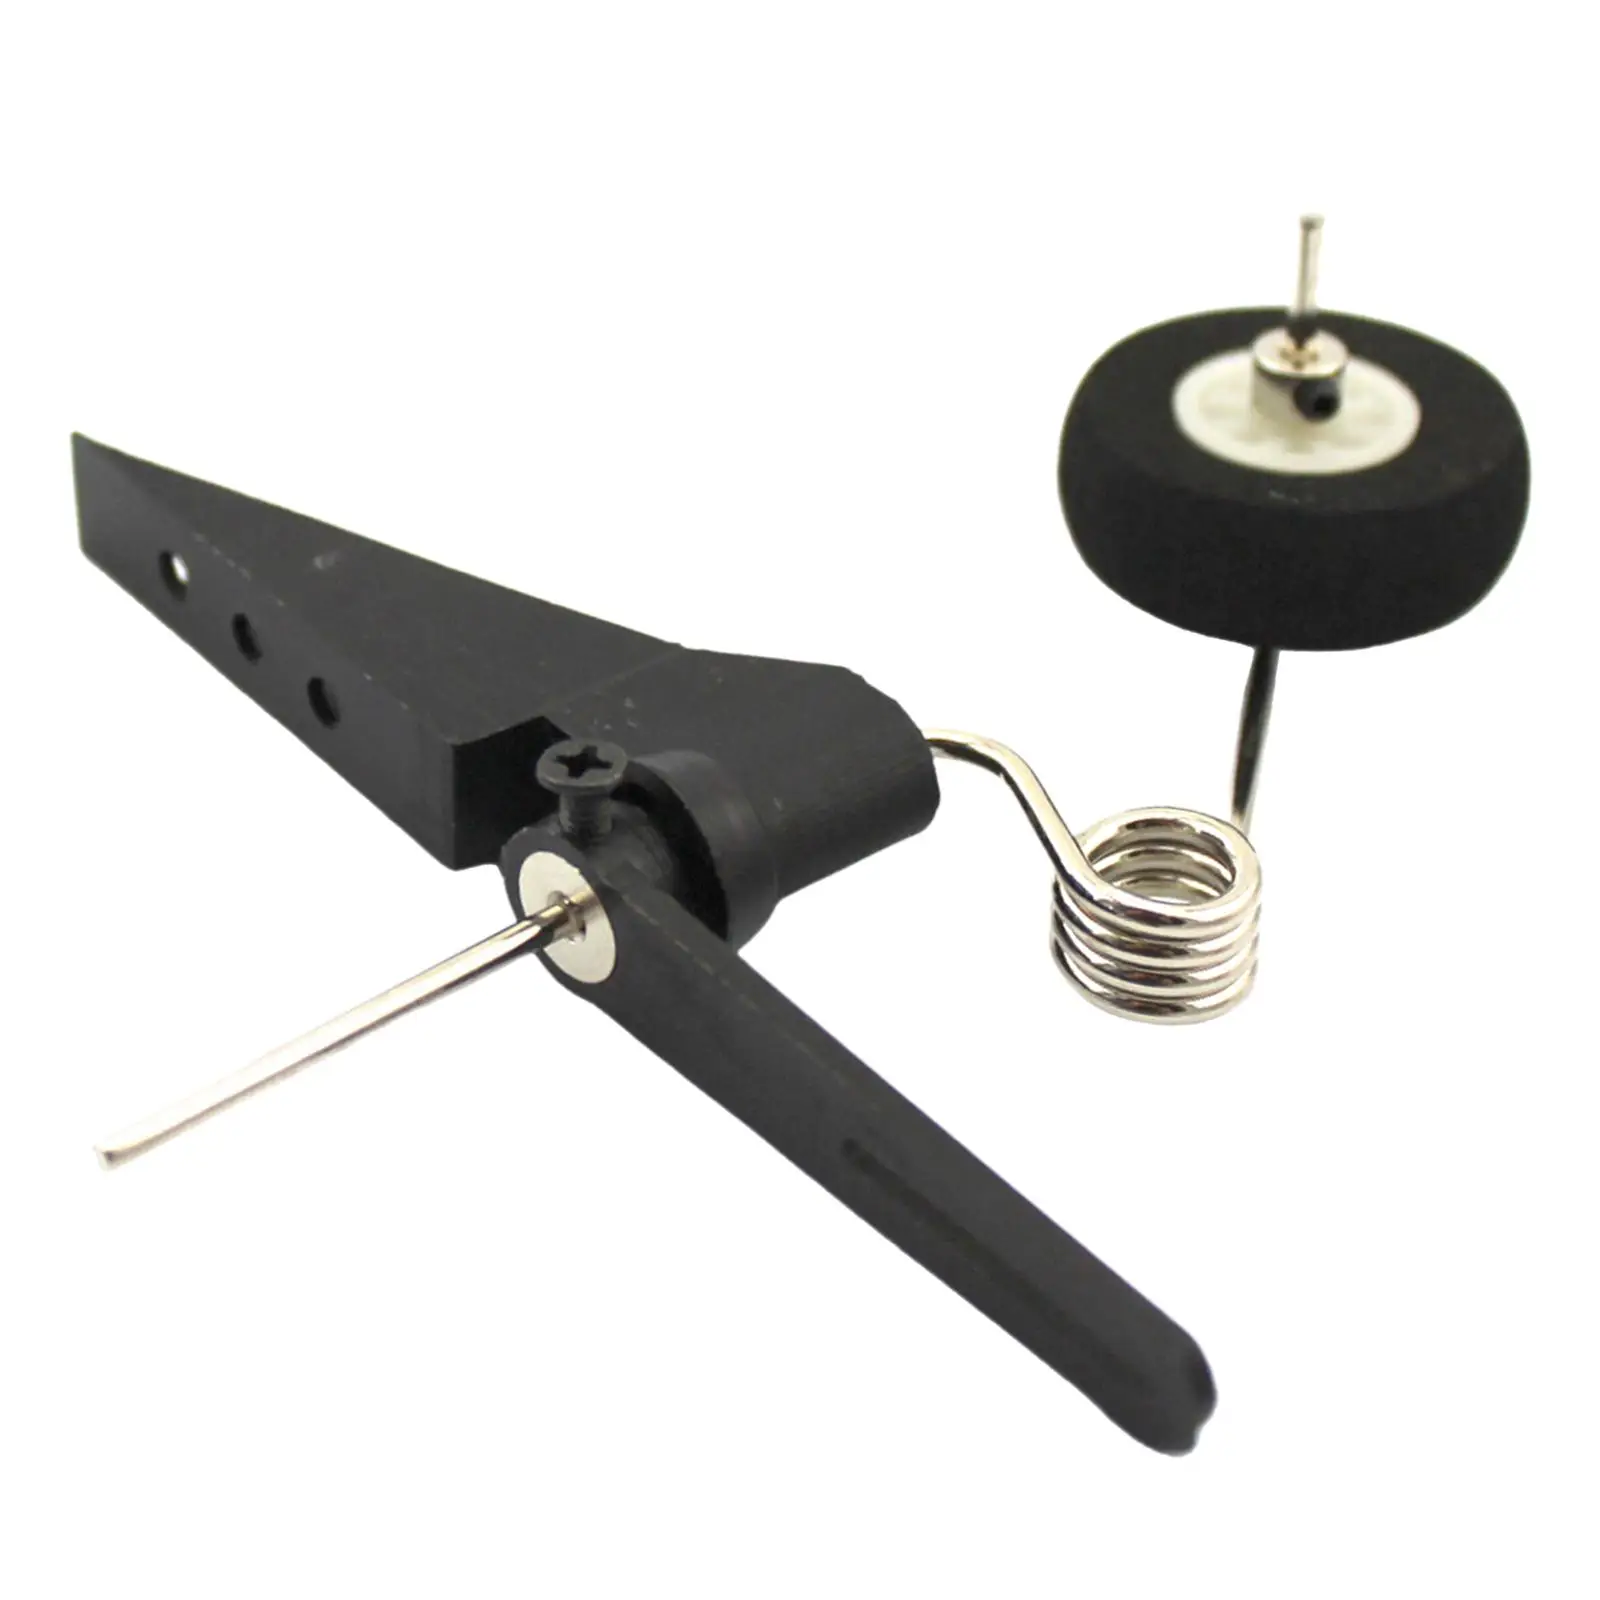 Tail Wheel Assembly for RC Airplane Attachment Rack Stable Replace Kits Parts Landing Gear DIY